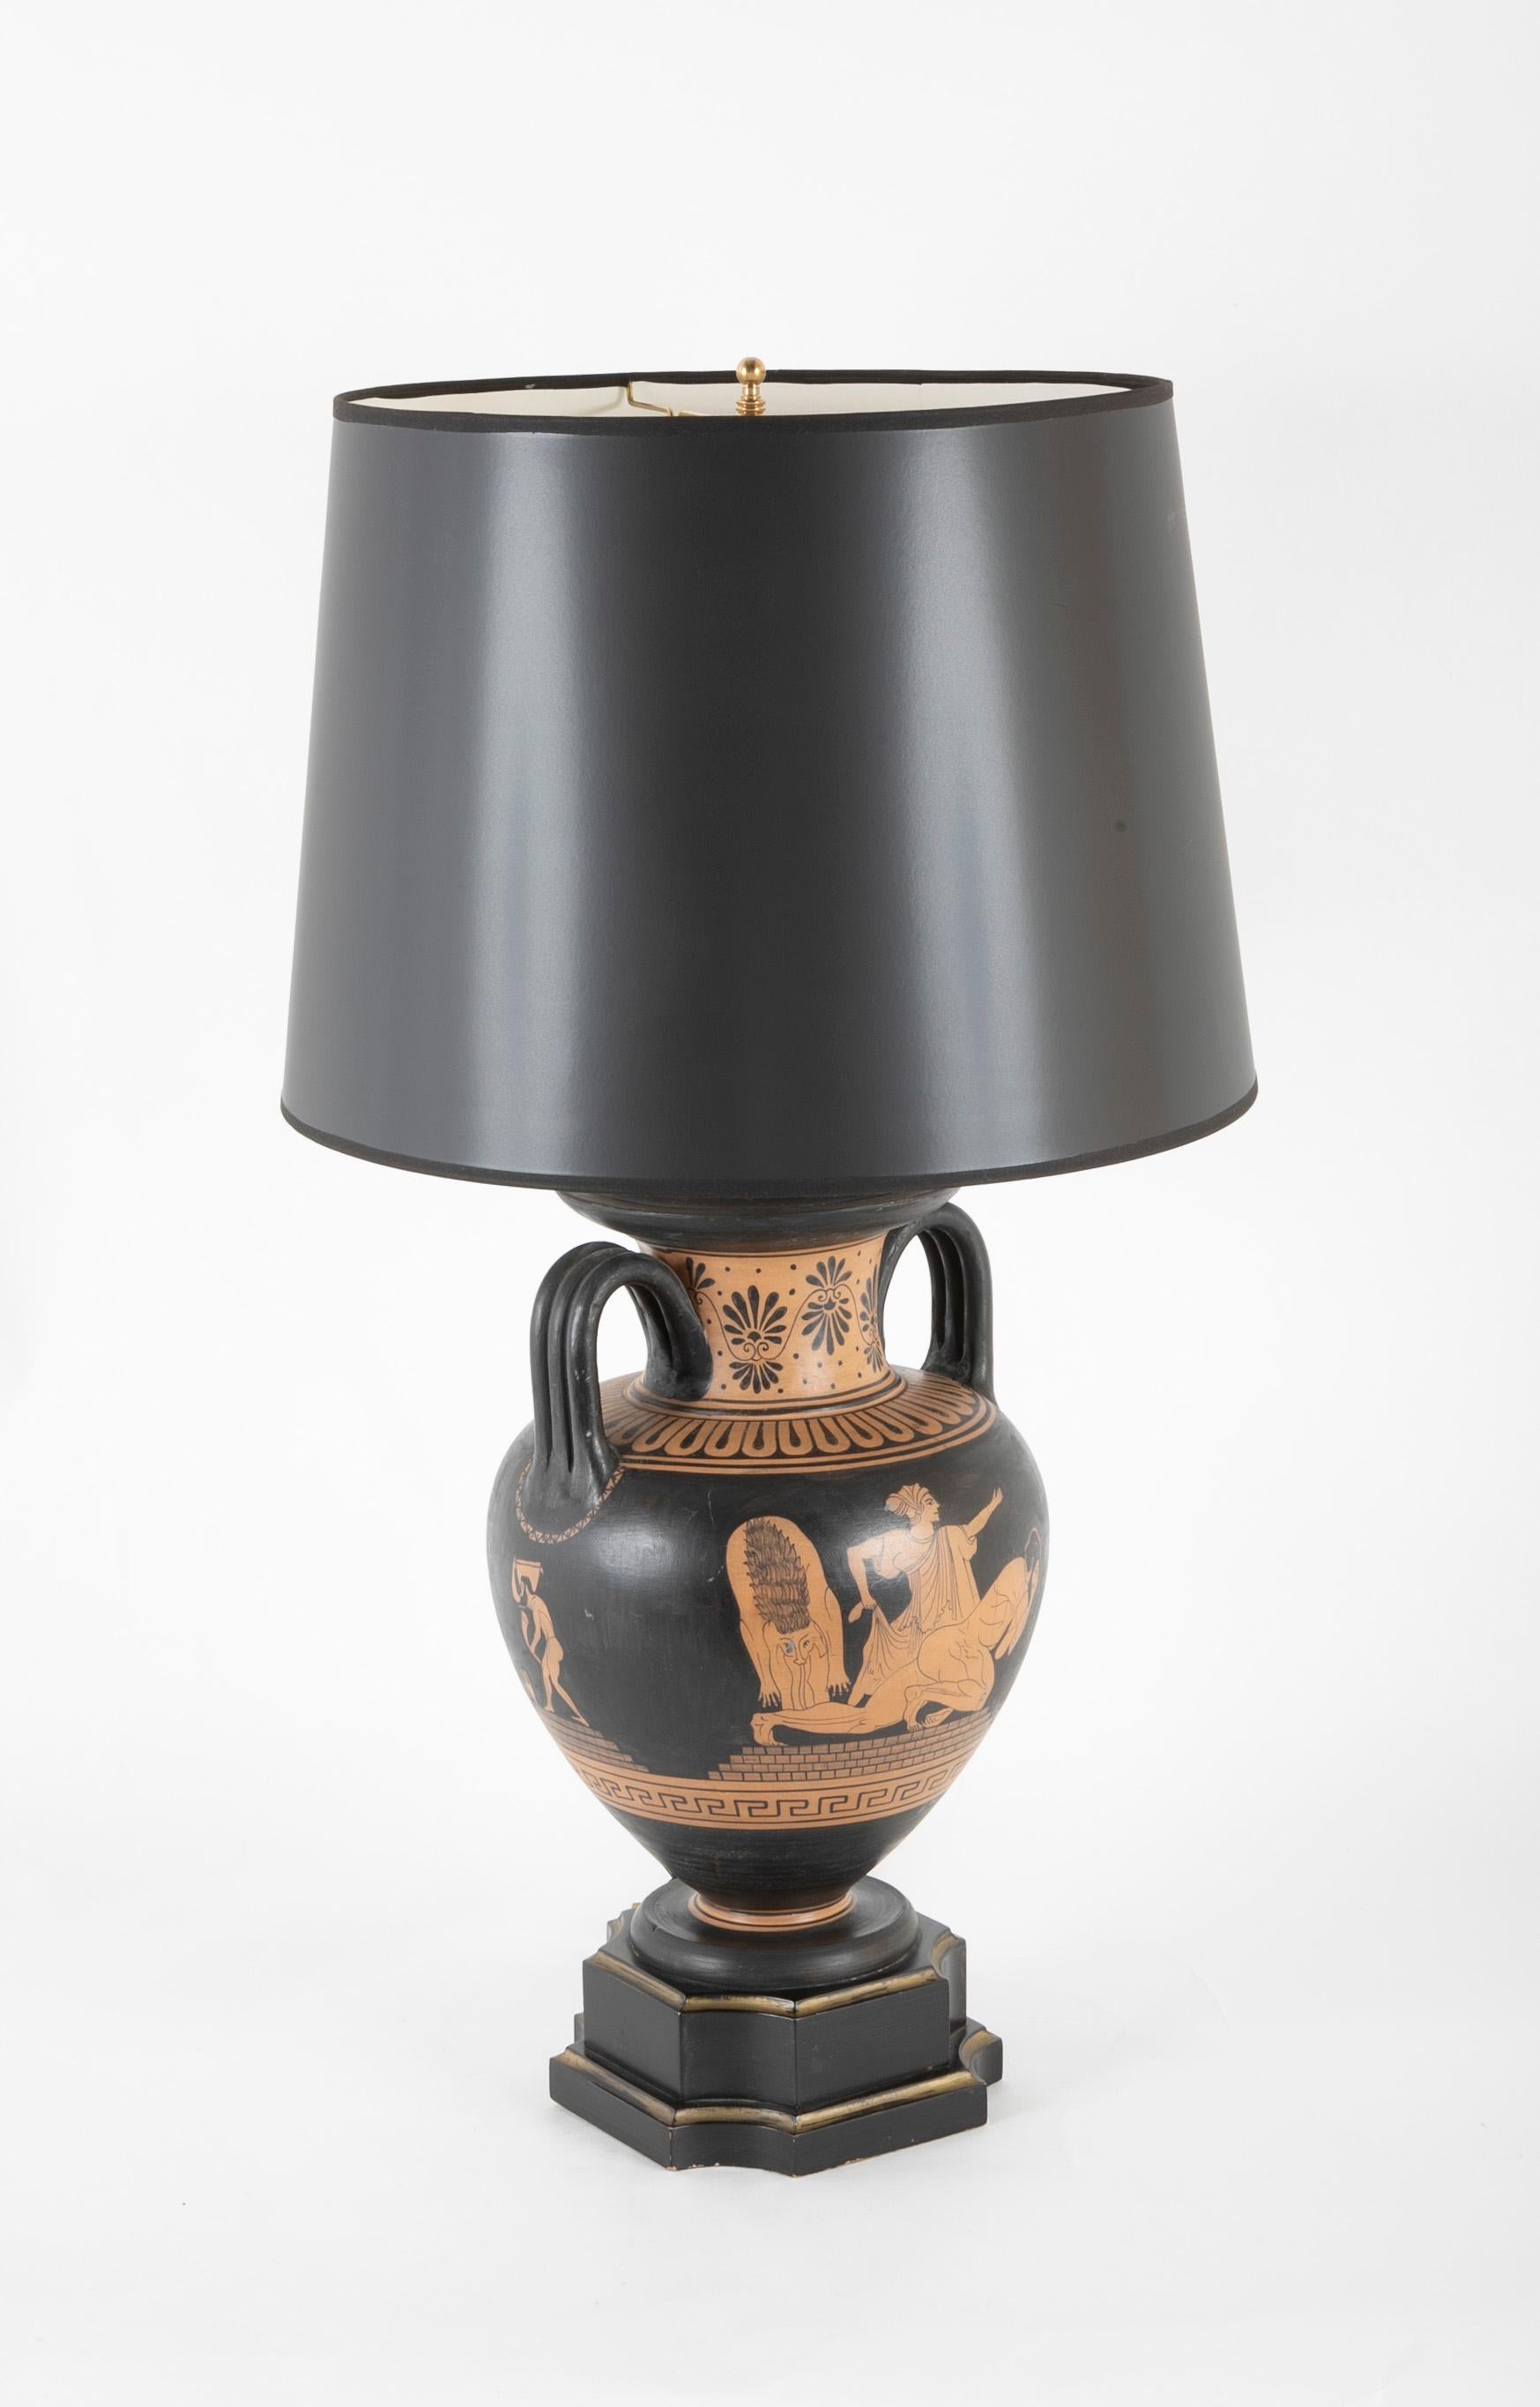 Red and black painted terracotta vase in the form of an ancient Greek krater now mounted on a black and giltwood base as a lamp. The urn form with two handles is decorated with a mythological scene from the Odyssey, with figures on all four sides. A